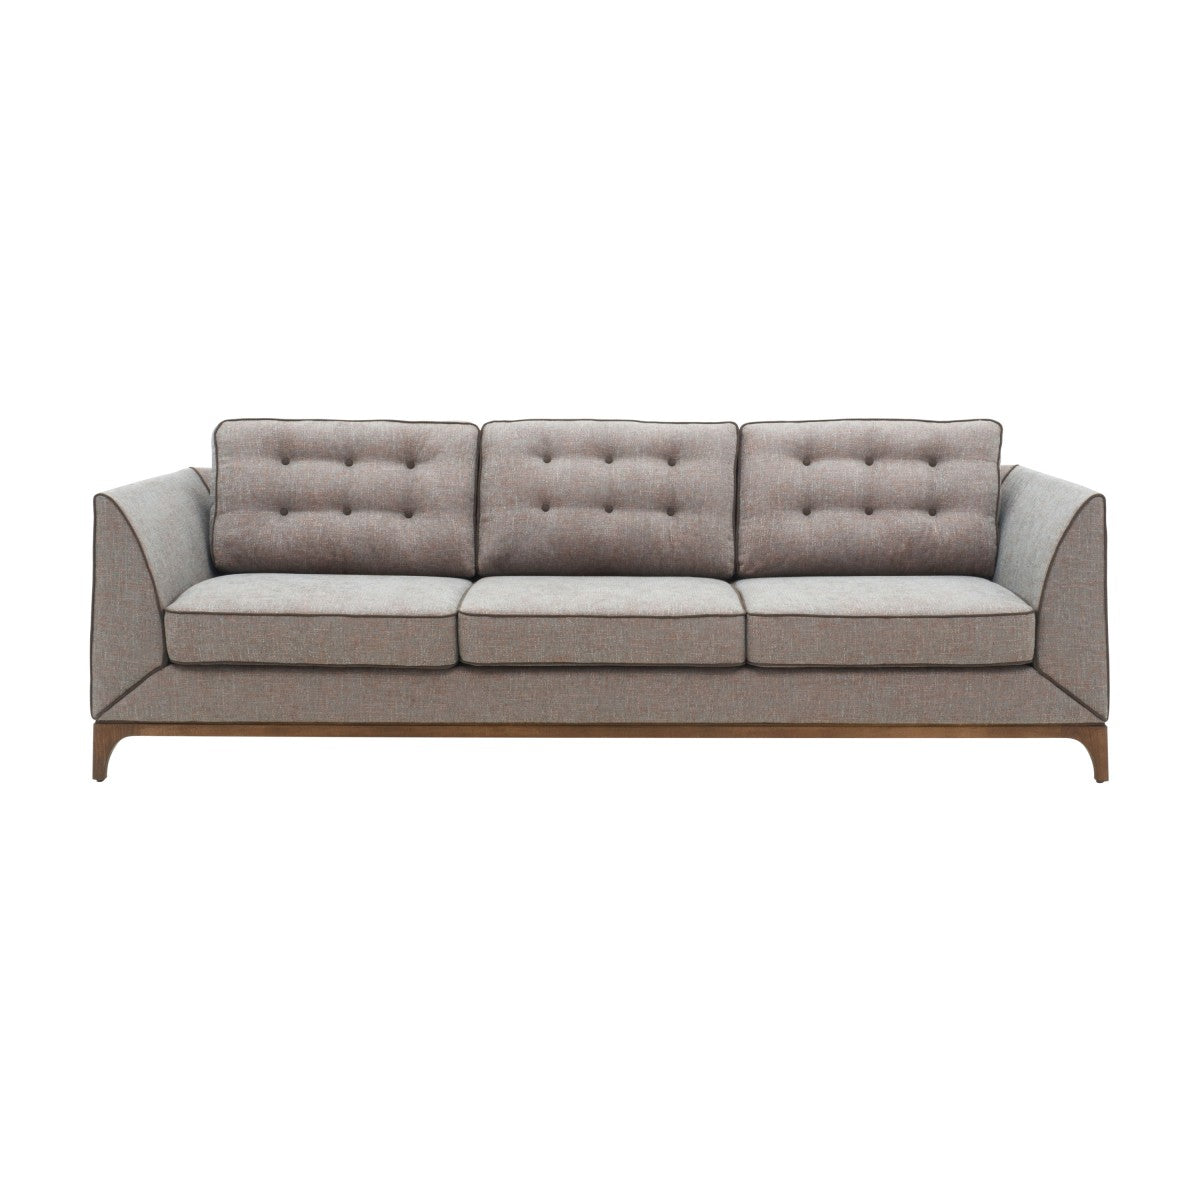 Mysterio Bespoke Upholstered Modern Style Five Seater Sofa MS9624G Custom Made To Order